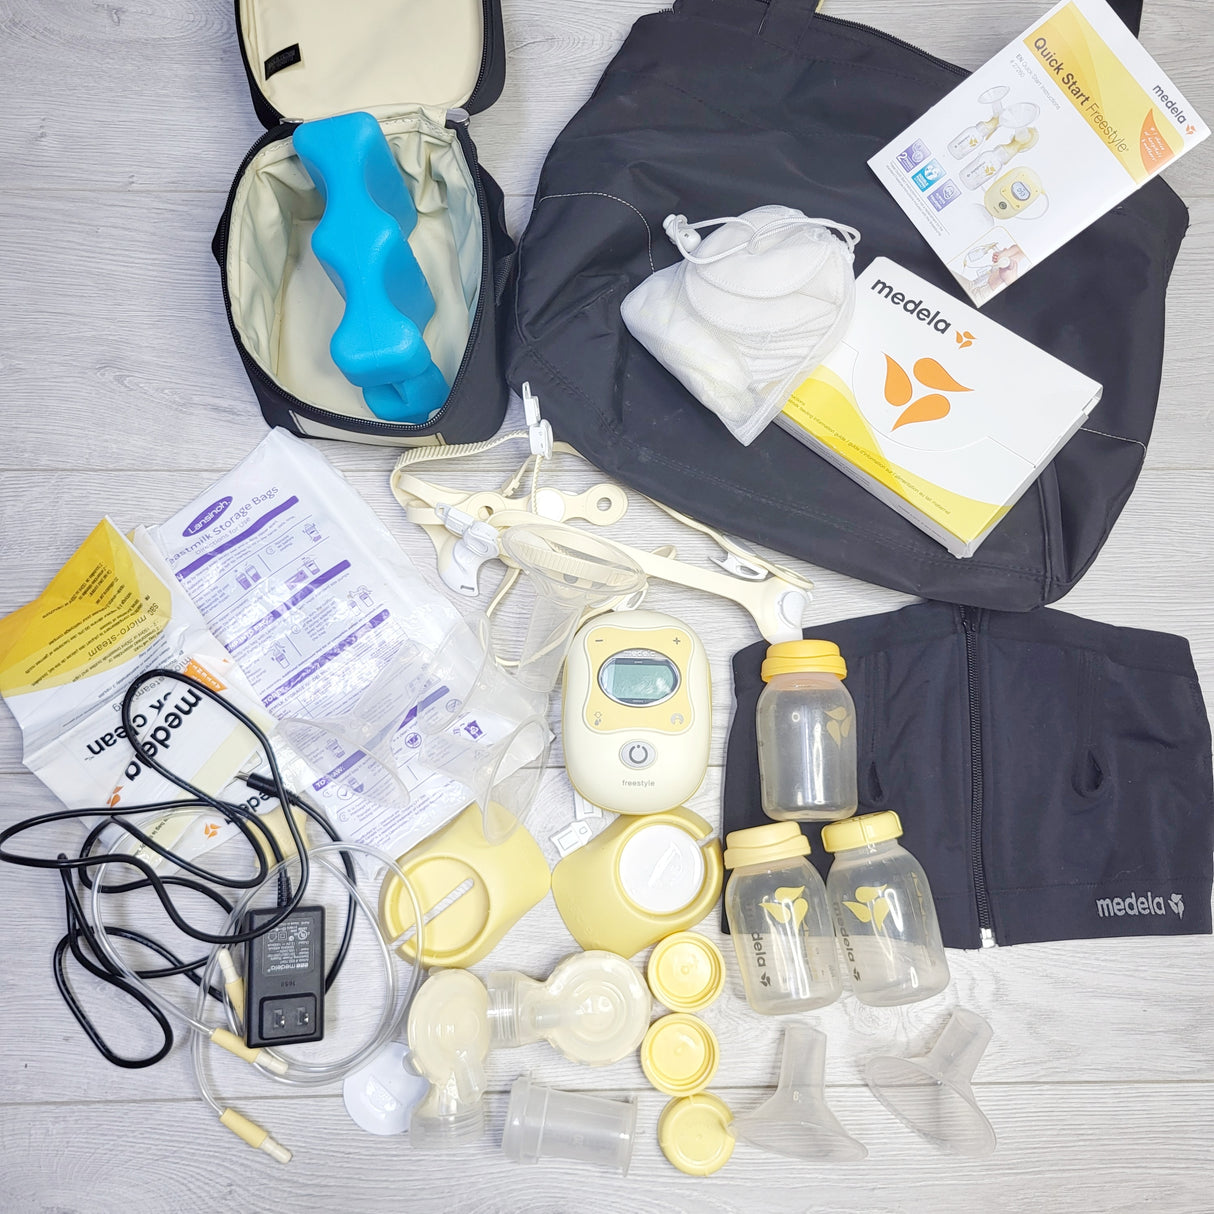 HWIL - Medela Freestyle Pump With Accessories